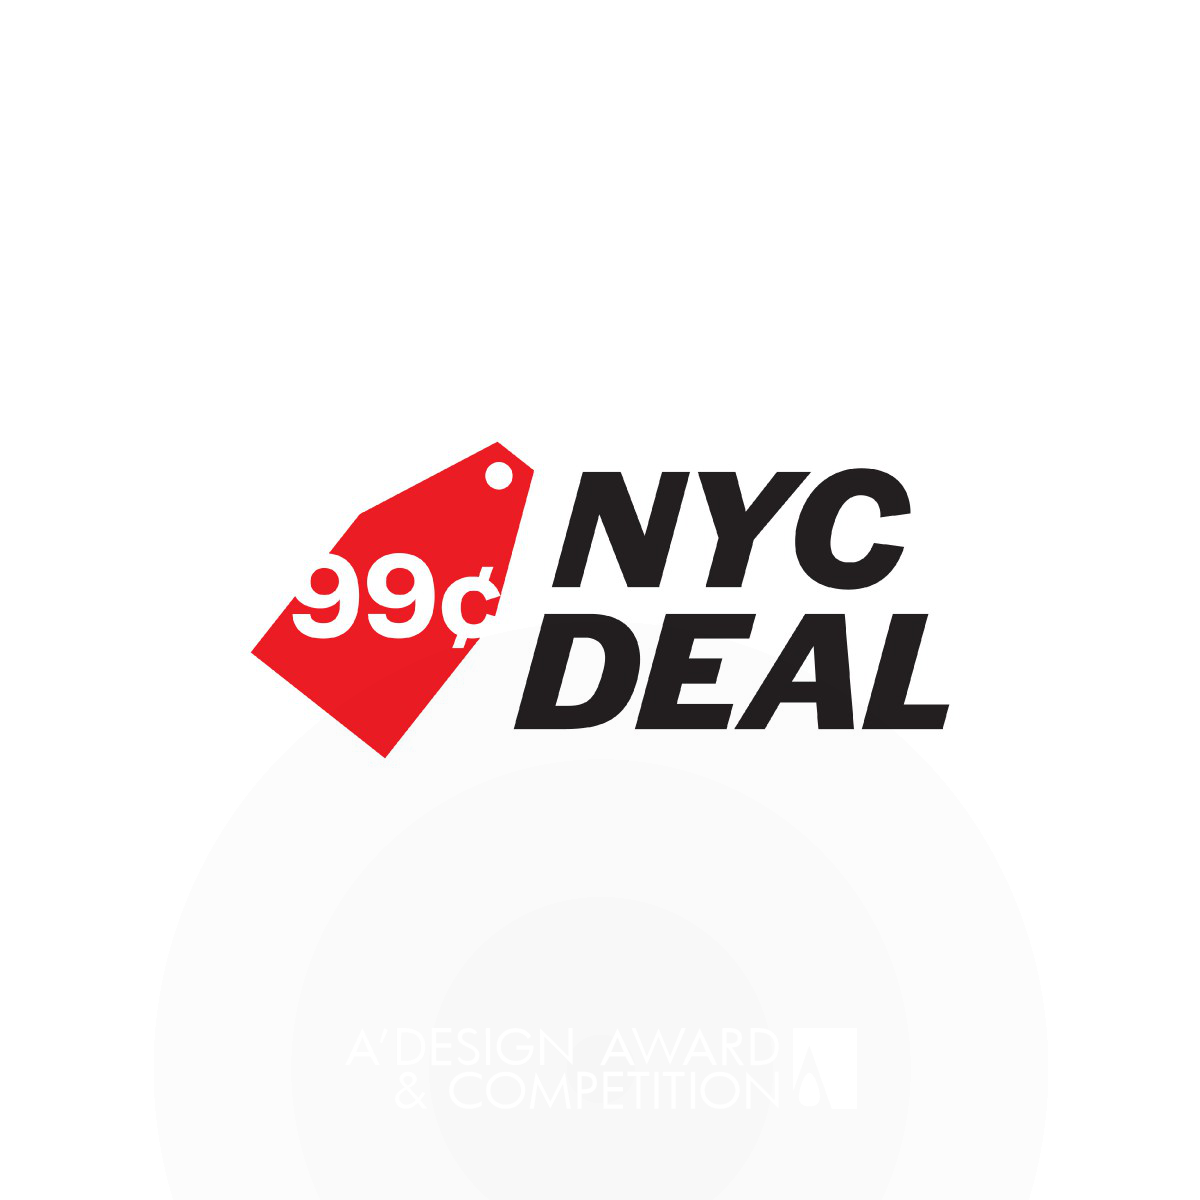 NYC Deal Brand Identity by Chi Hao Chang